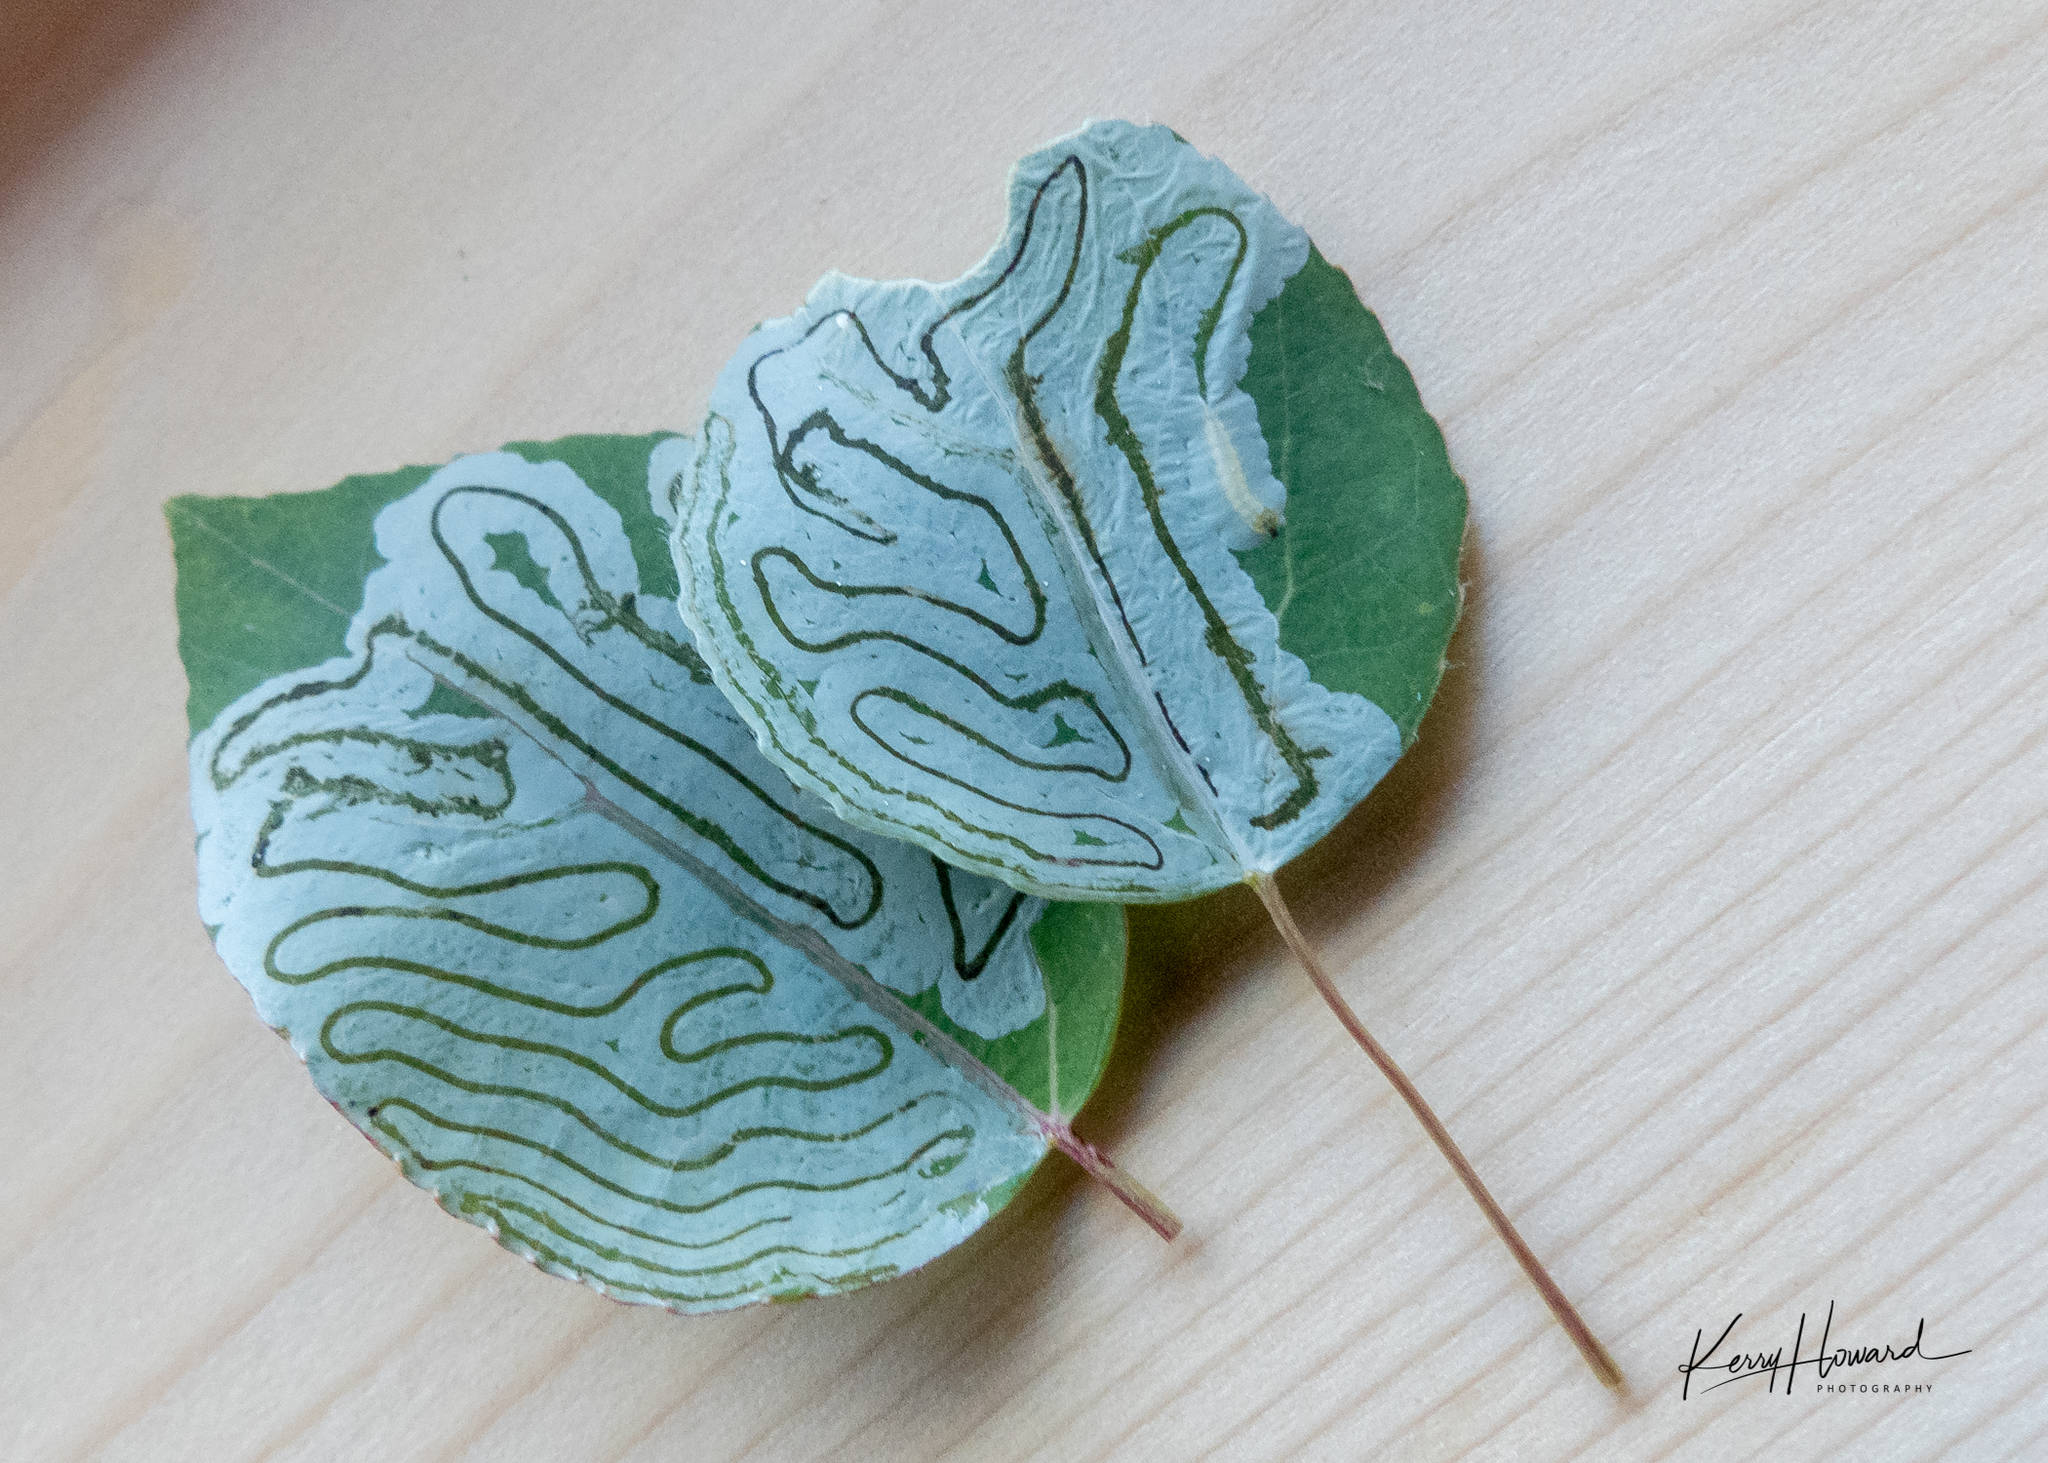 Larvae of the aspen leaf miner eat the leaf surface, leaving conspicuous trails. One larva is visible at the end of its trail on the leaf on the right. (Photo by Kerry Howard)